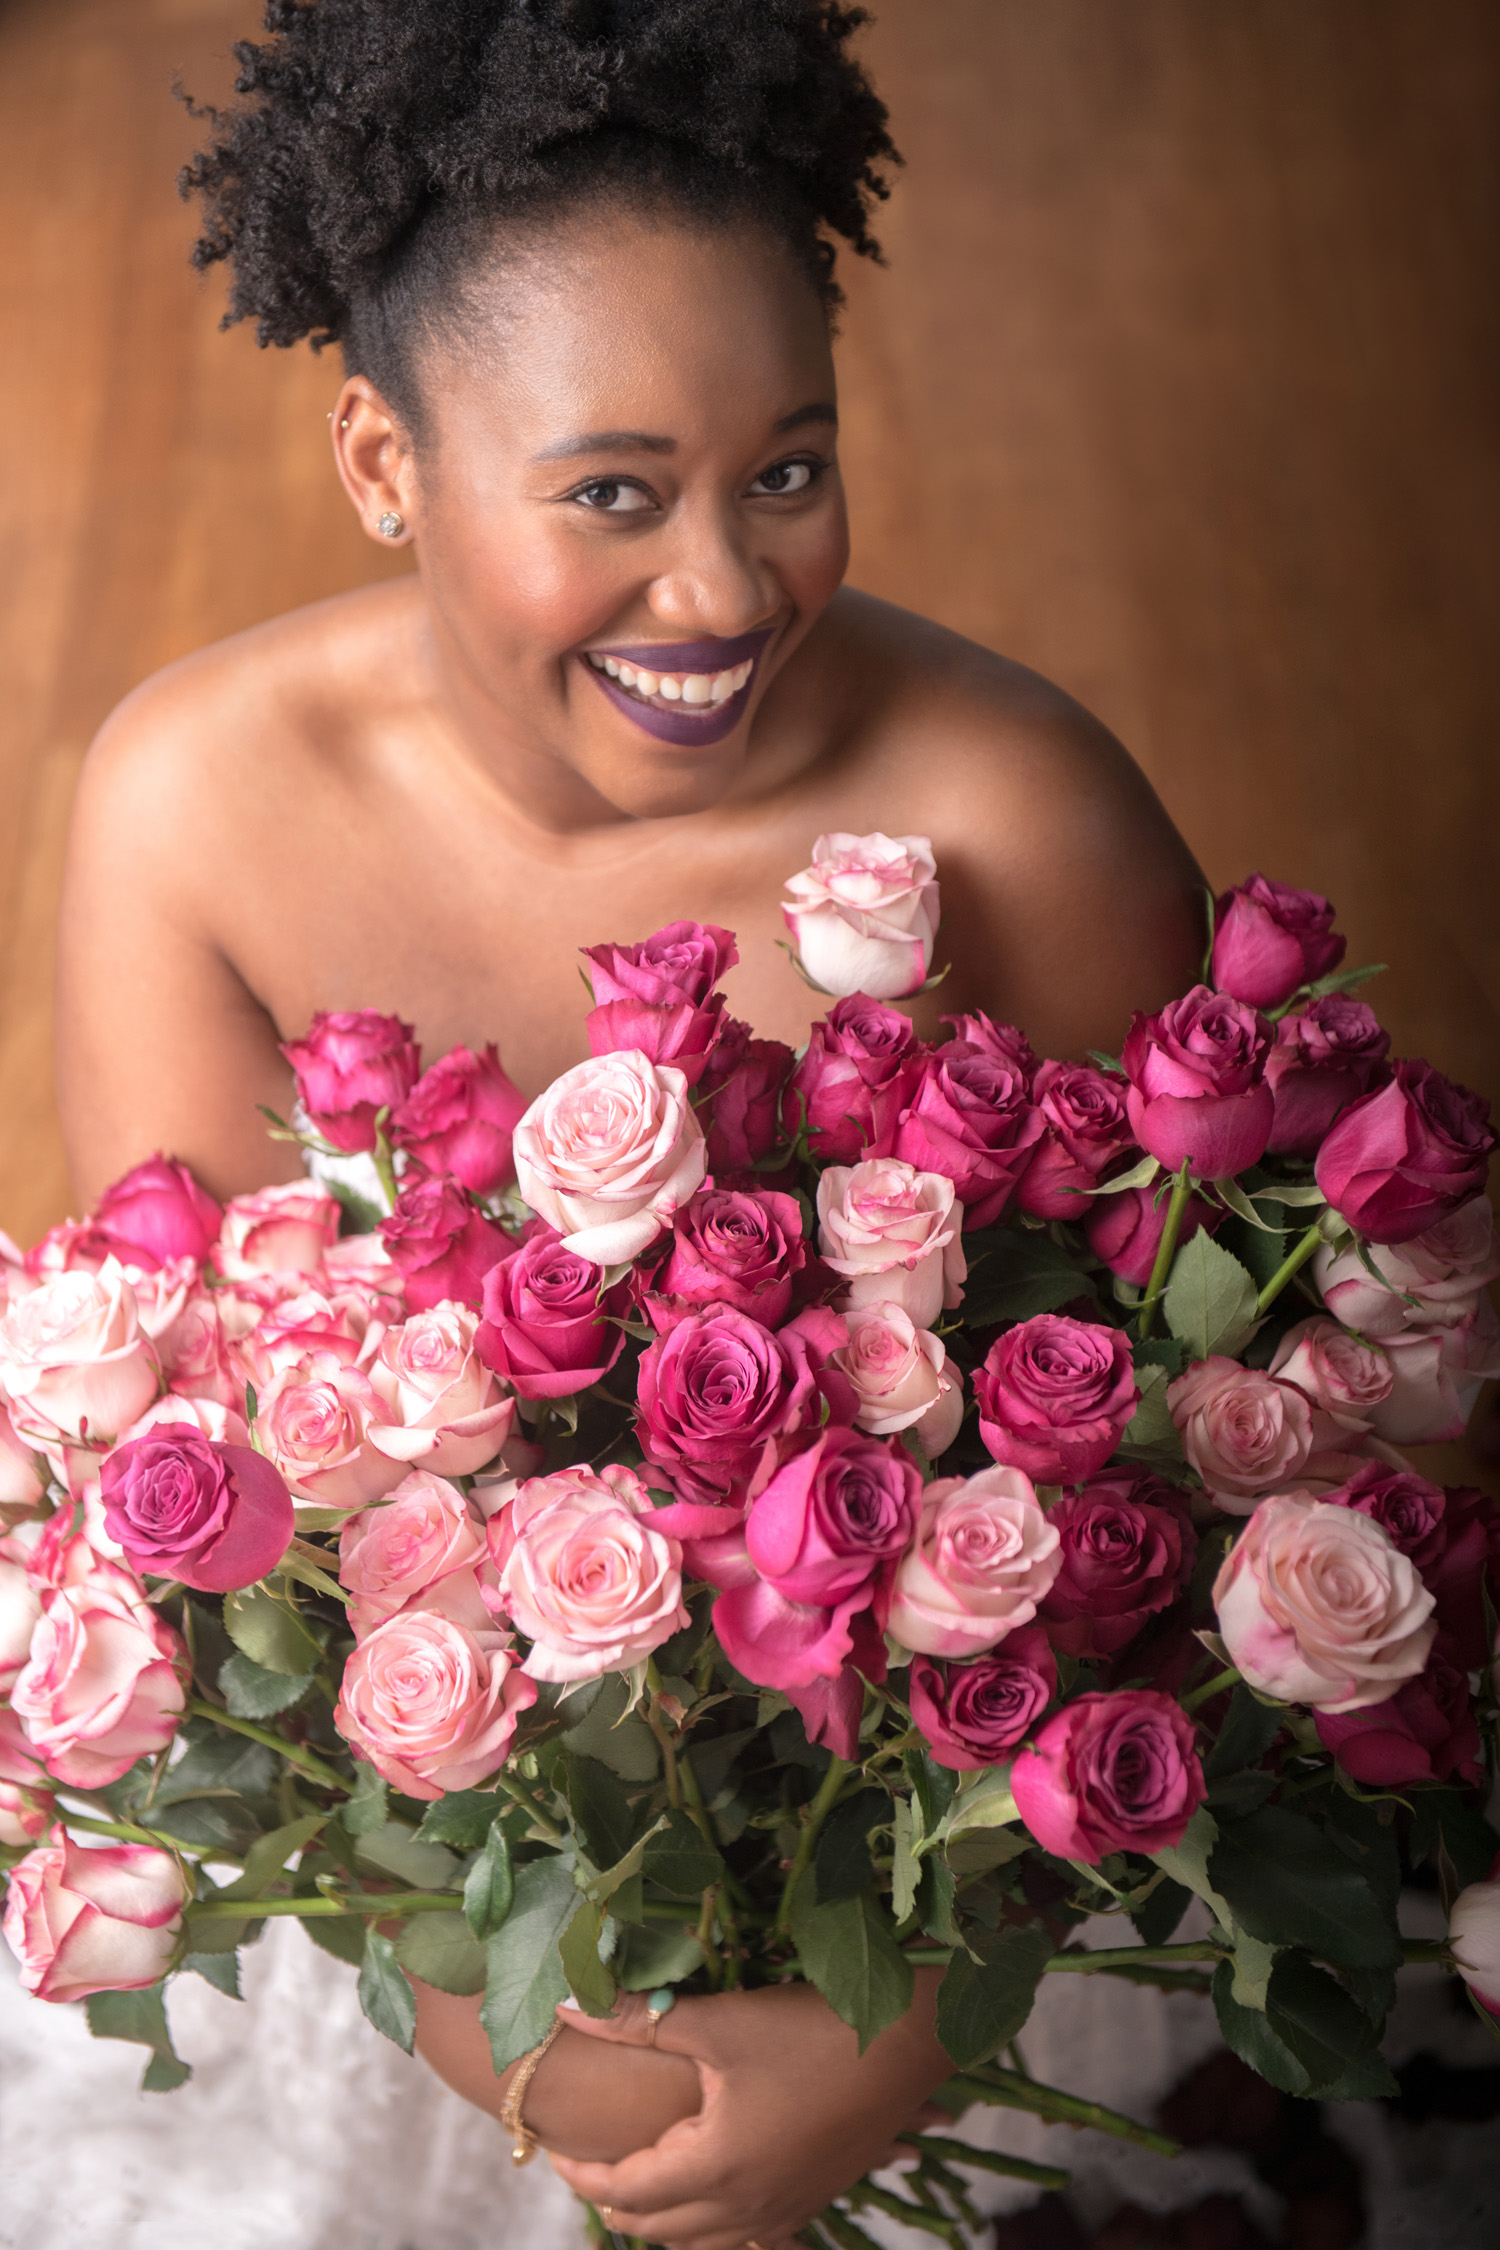 Woman posing for personal portrait with flowers in a photography studio setting during a personal branding photoshoot in Singapore, White Room Studio. Credit: White Room Studio Pte Ltd